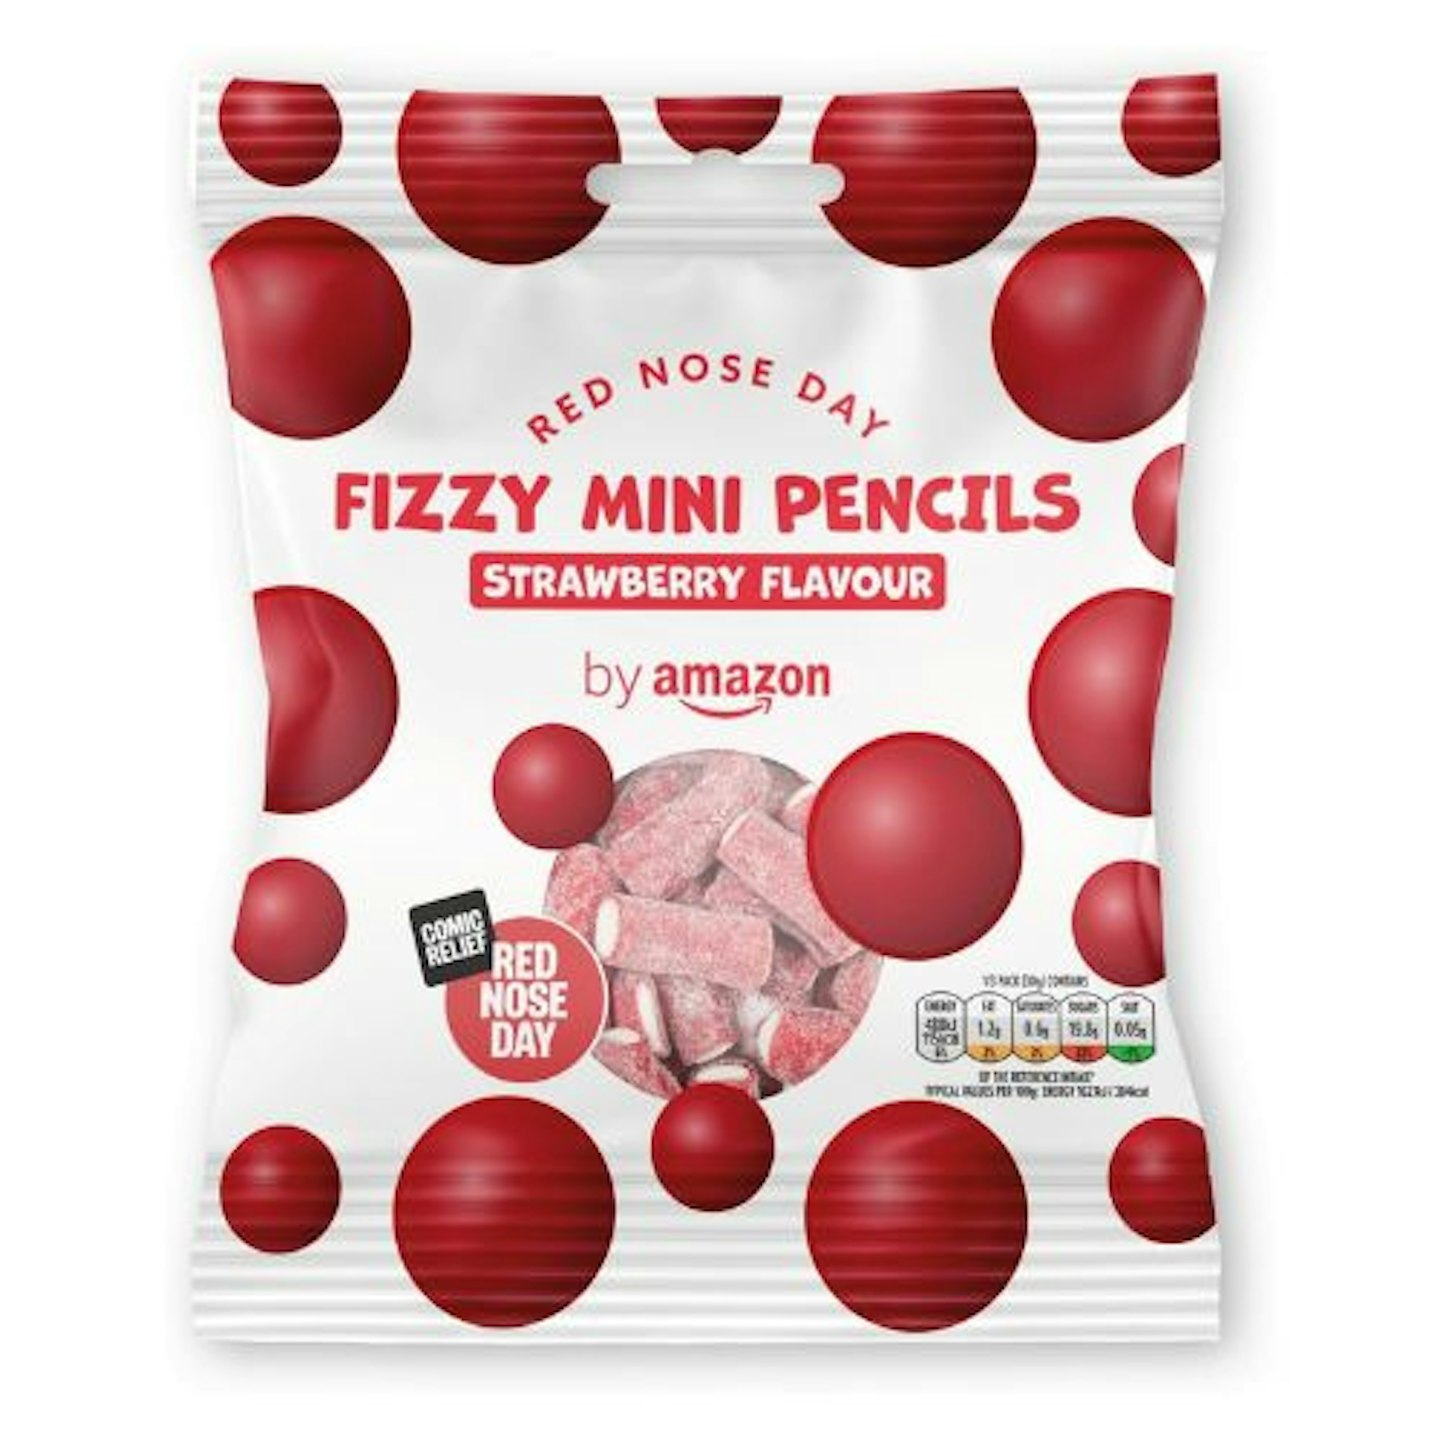 by Amazon Red Nose Day Fizzy Mini Pencils, 90g – on behalf of Comic Relief